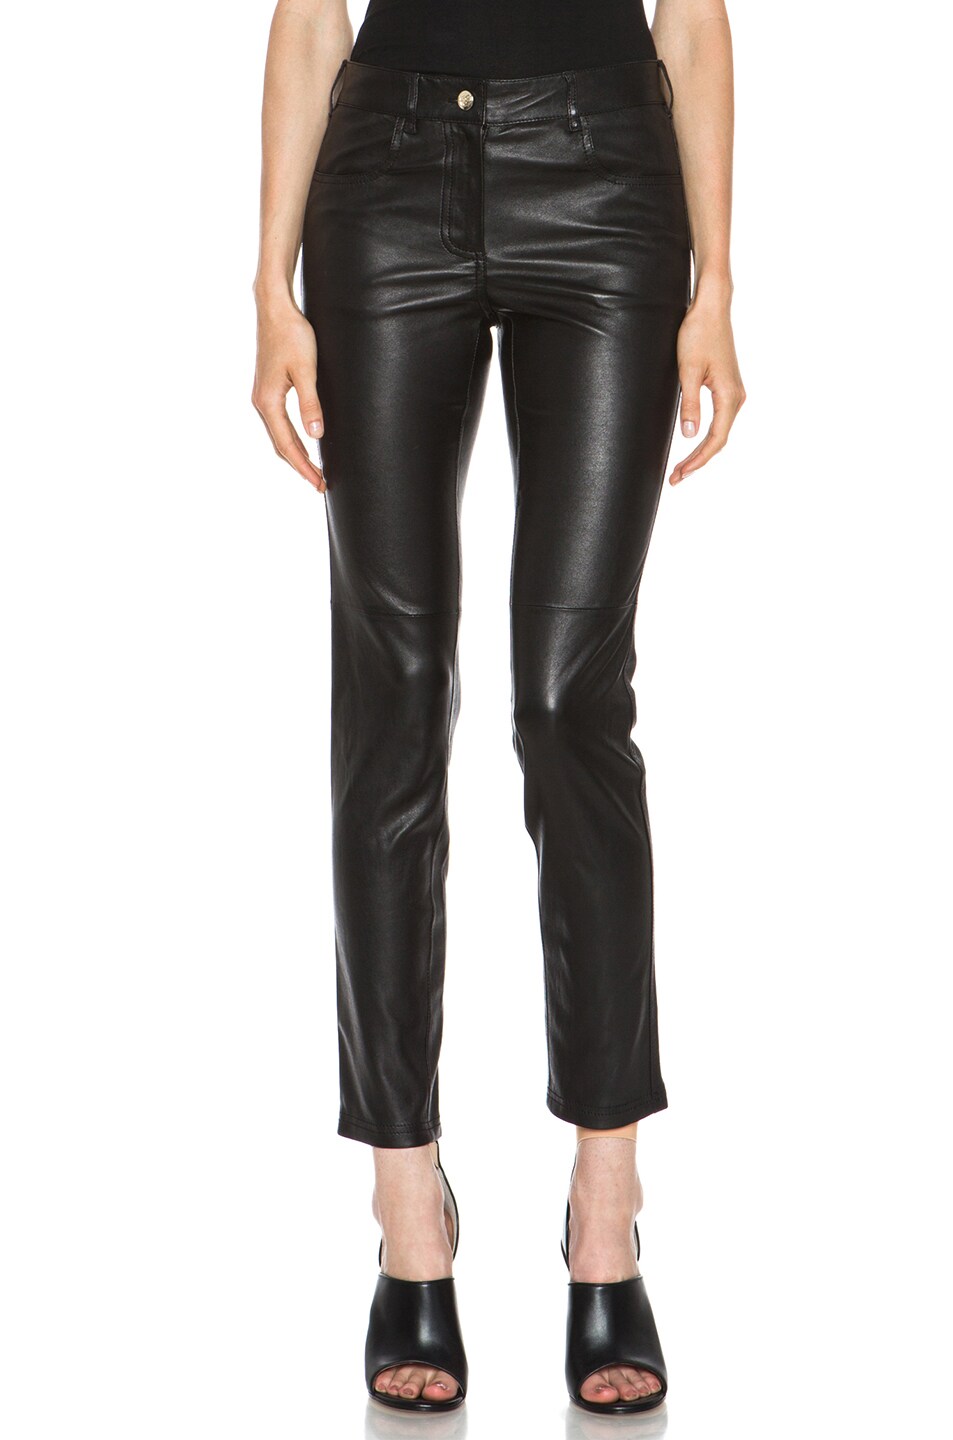 Givenchy Leather Pant in Black | FWRD